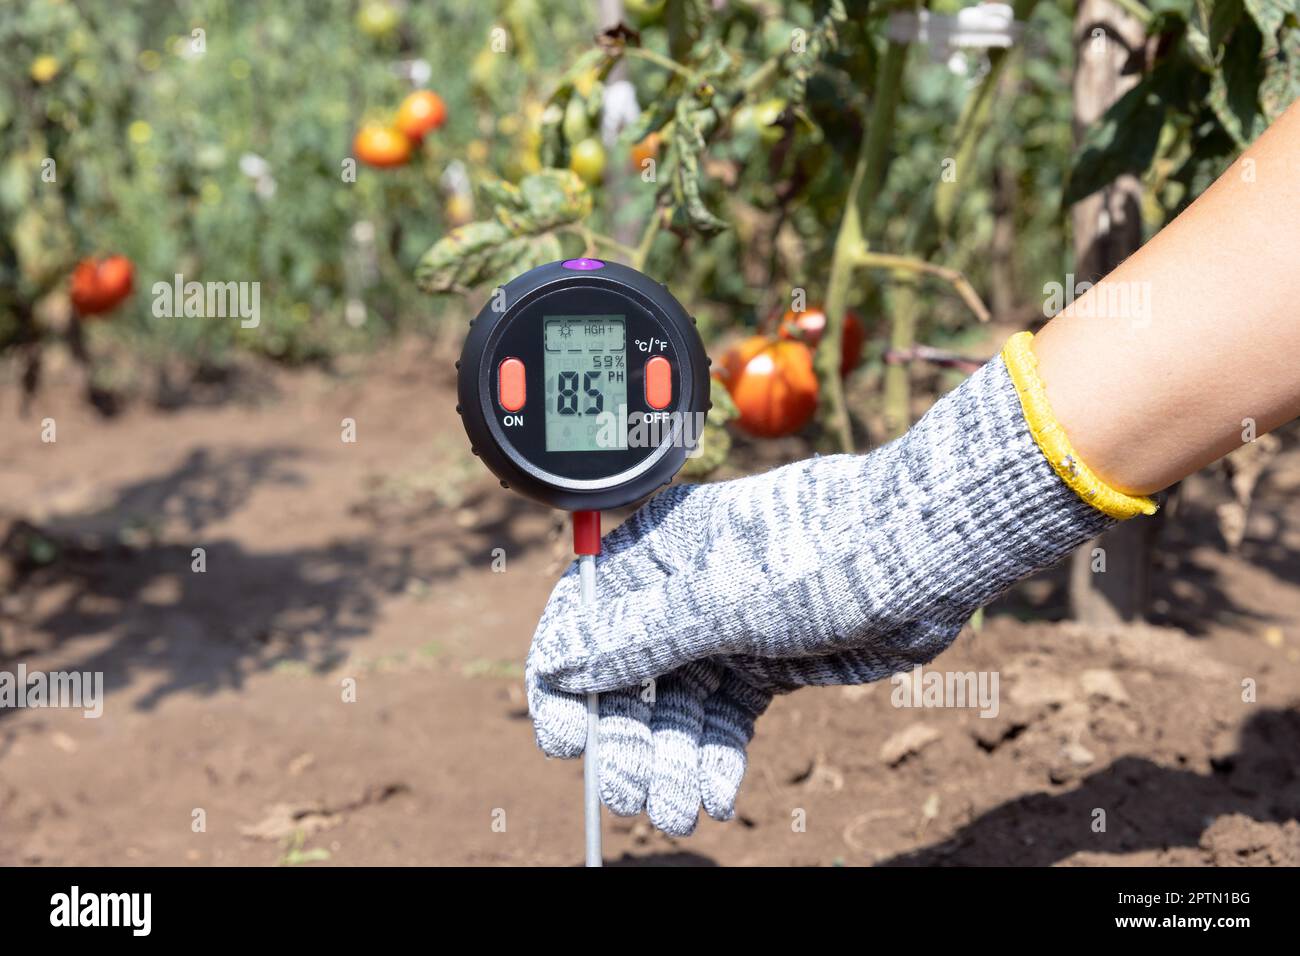 Soil pH, environmental illumination and humidity quality measurement in a vegetable garden Stock Photo